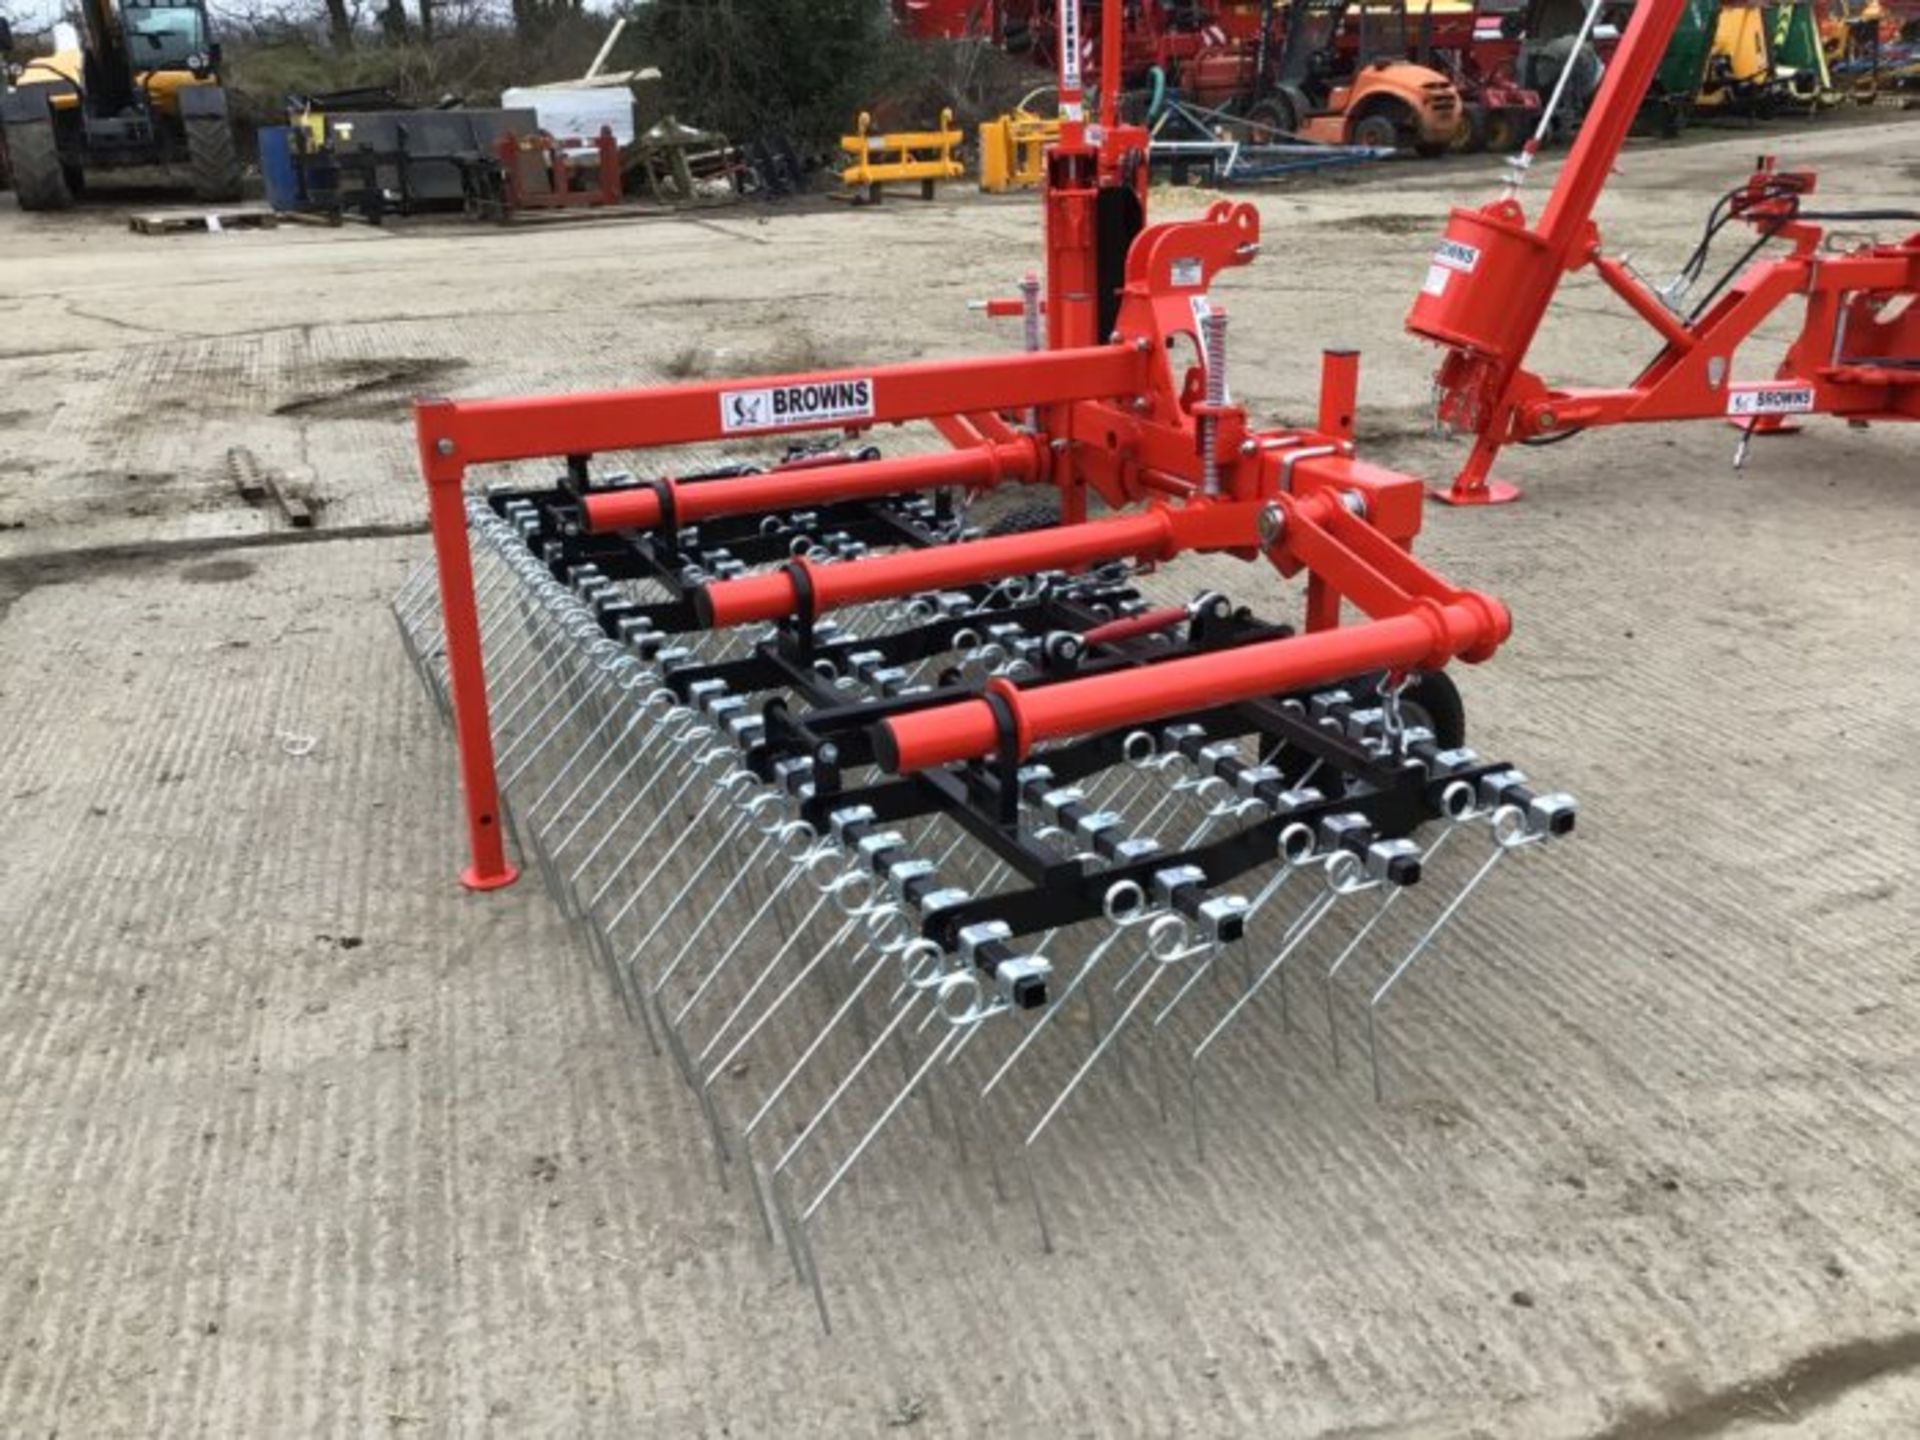 NEW BROWNS 3 METRE GRASS HARROW. 3 POINT LINKAGE - Image 2 of 8